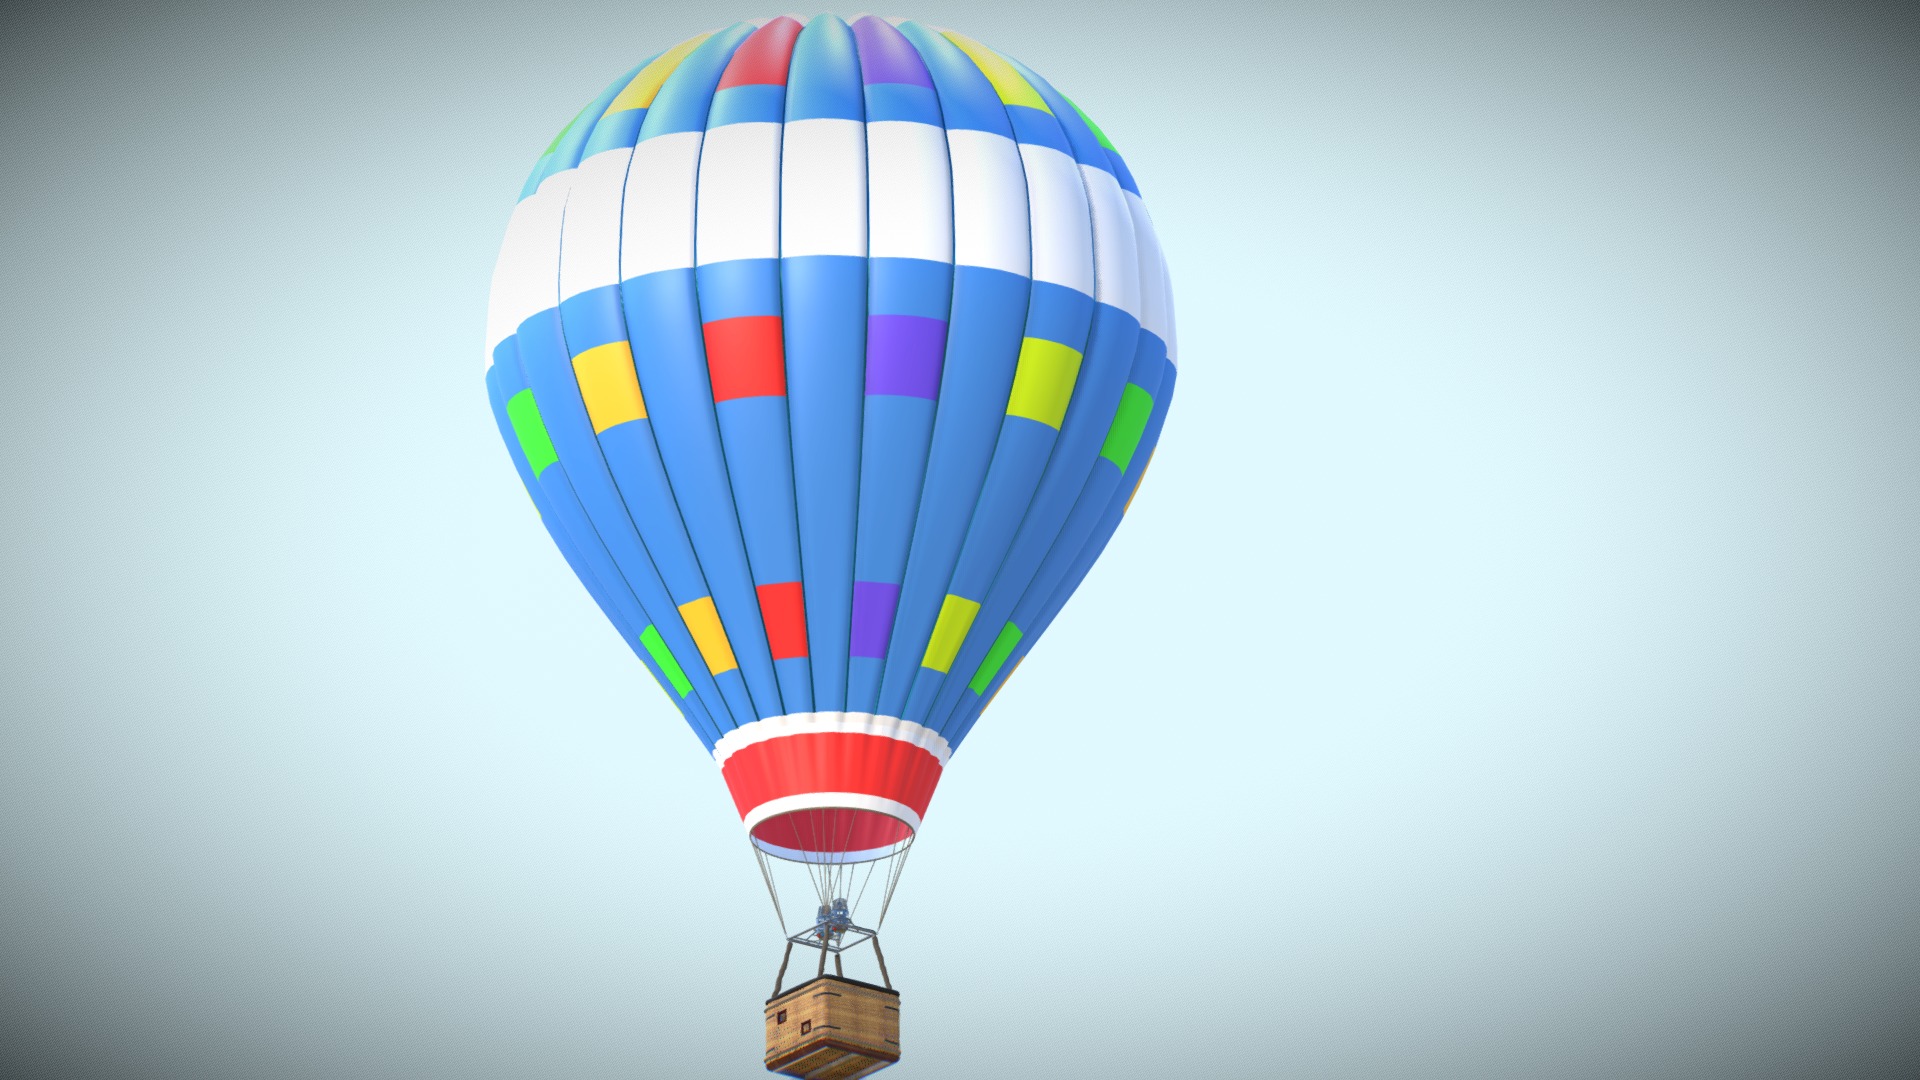 3D model Balloon Hot Air - This is a 3D model of the Balloon Hot Air. The 3D model is about a hot air balloon in the sky.